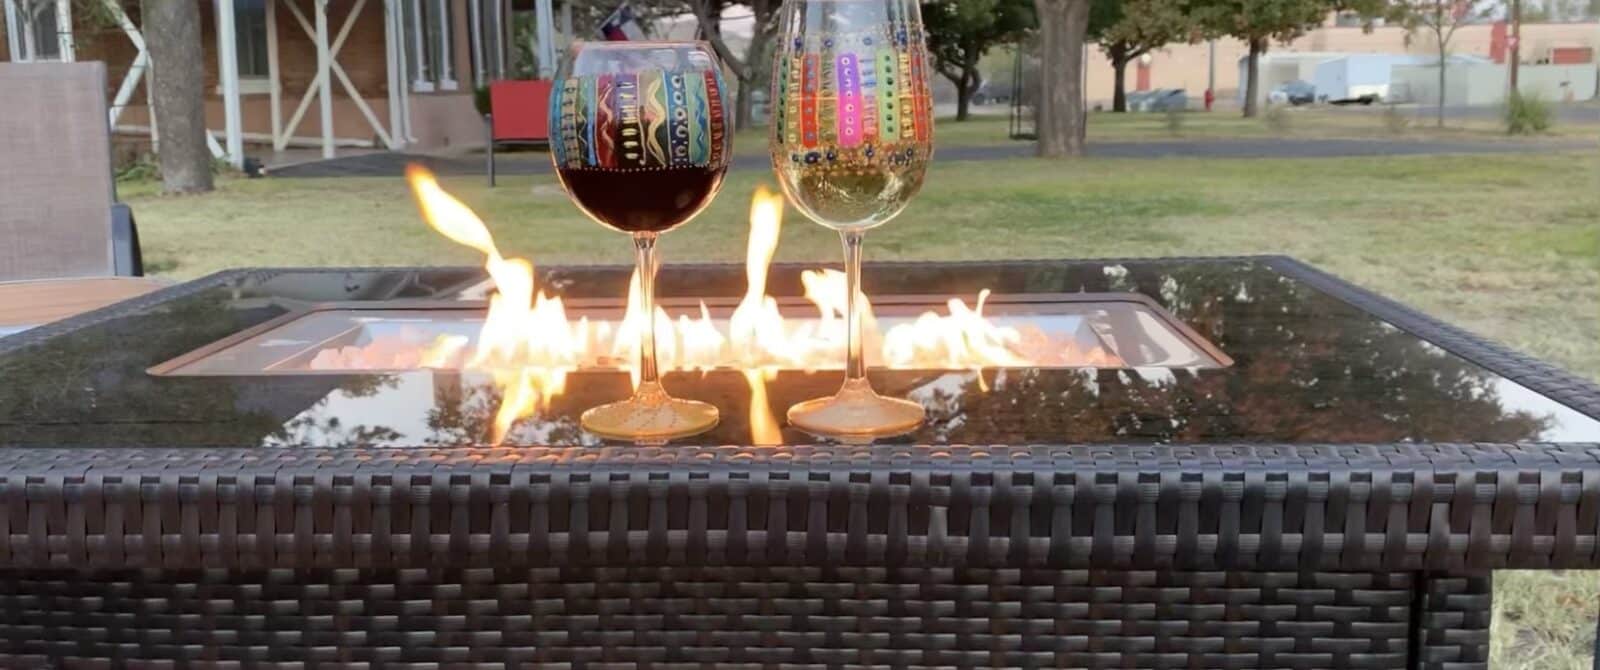 a fire pit with flames and two wine glasses on it